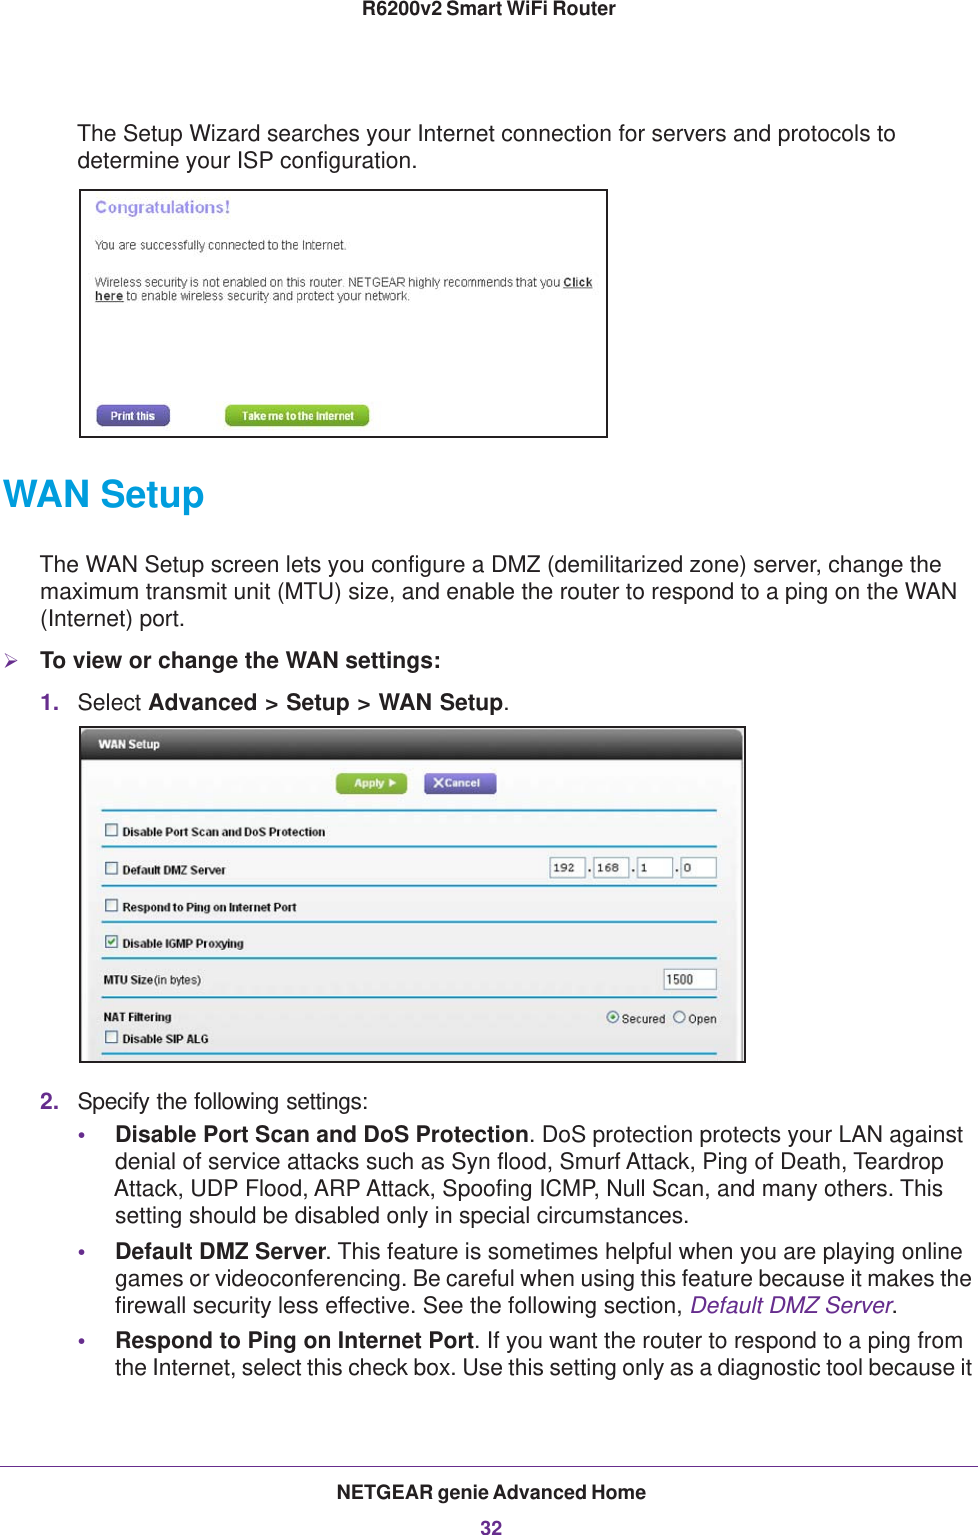 NETGEAR genie Advanced Home32R6200v2 Smart WiFi Router The Setup Wizard searches your Internet connection for servers and protocols to determine your ISP configuration. WAN SetupThe WAN Setup screen lets you configure a DMZ (demilitarized zone) server, change the maximum transmit unit (MTU) size, and enable the router to respond to a ping on the WAN (Internet) port. To view or change the WAN settings:1. Select Advanced &gt; Setup &gt; WAN Setup.2. Specify the following settings:•Disable Port Scan and DoS Protection. DoS protection protects your LAN against denial of service attacks such as Syn flood, Smurf Attack, Ping of Death, Teardrop Attack, UDP Flood, ARP Attack, Spoofing ICMP, Null Scan, and many others. This setting should be disabled only in special circumstances. •Default DMZ Server. This feature is sometimes helpful when you are playing online games or videoconferencing. Be careful when using this feature because it makes the firewall security less effective. See the following section, Default DMZ Server.•Respond to Ping on Internet Port. If you want the router to respond to a ping from the Internet, select this check box. Use this setting only as a diagnostic tool because it 